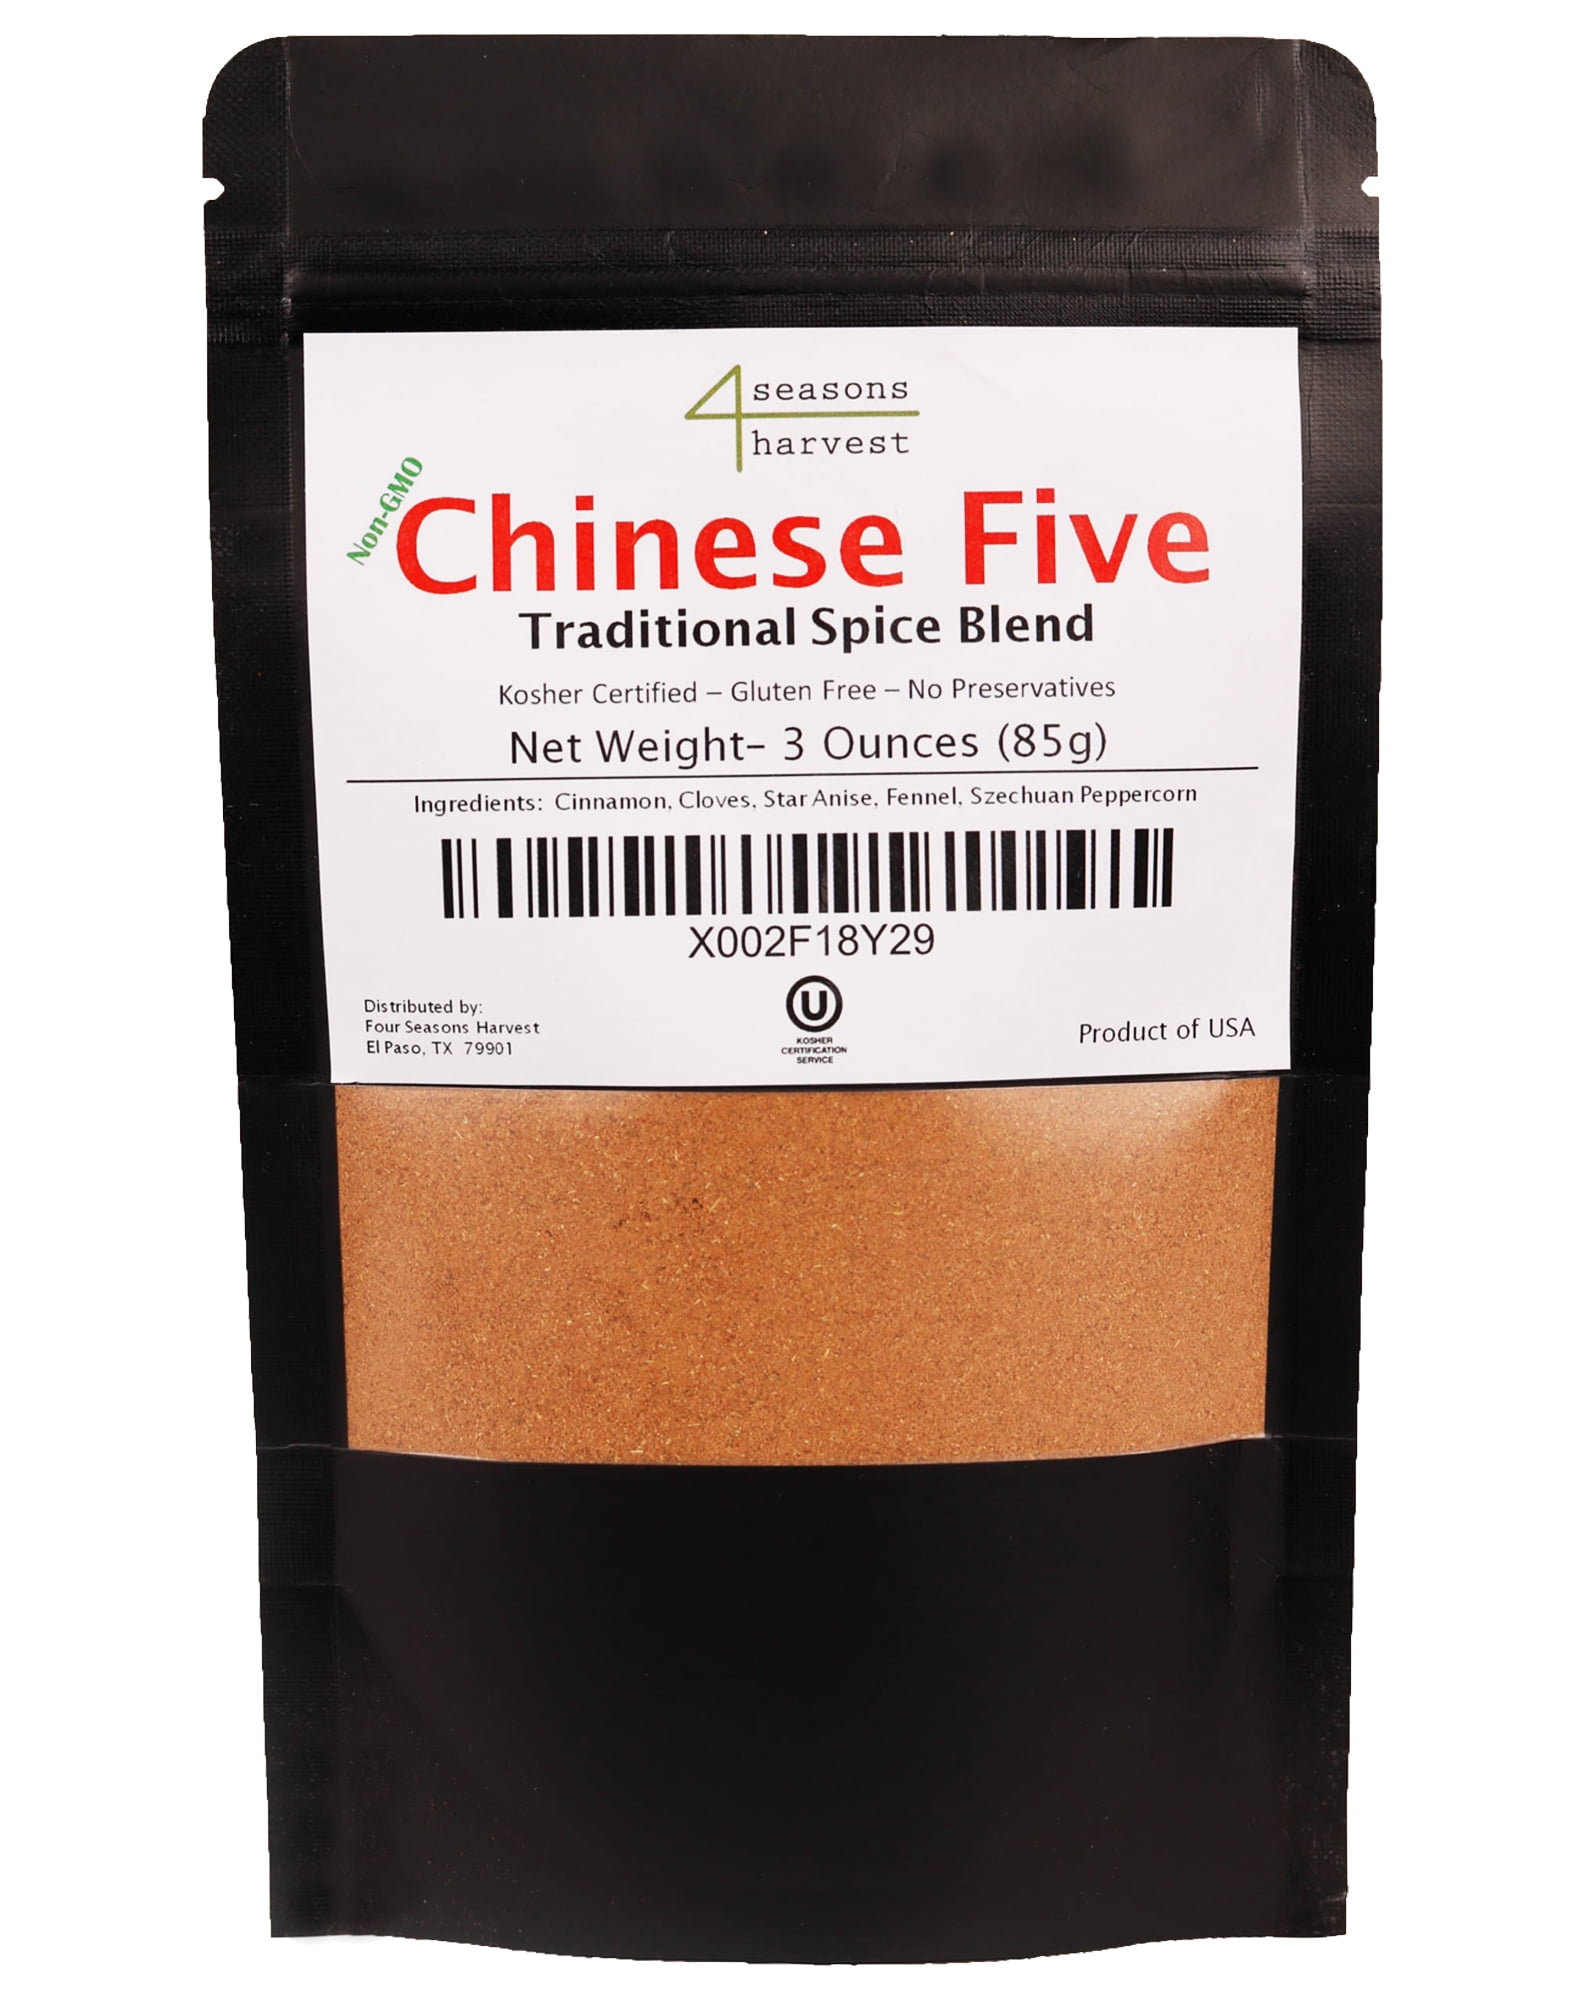  NPG Authentic Chinese Five Spice Blend 1.05 oz, Gluten Free,  All Natural Ground Chinese 5 Spice Powder, No Preservatives No MSG, Mixed Spice  Seasoning for Asian Cuisine & Stir Fry 